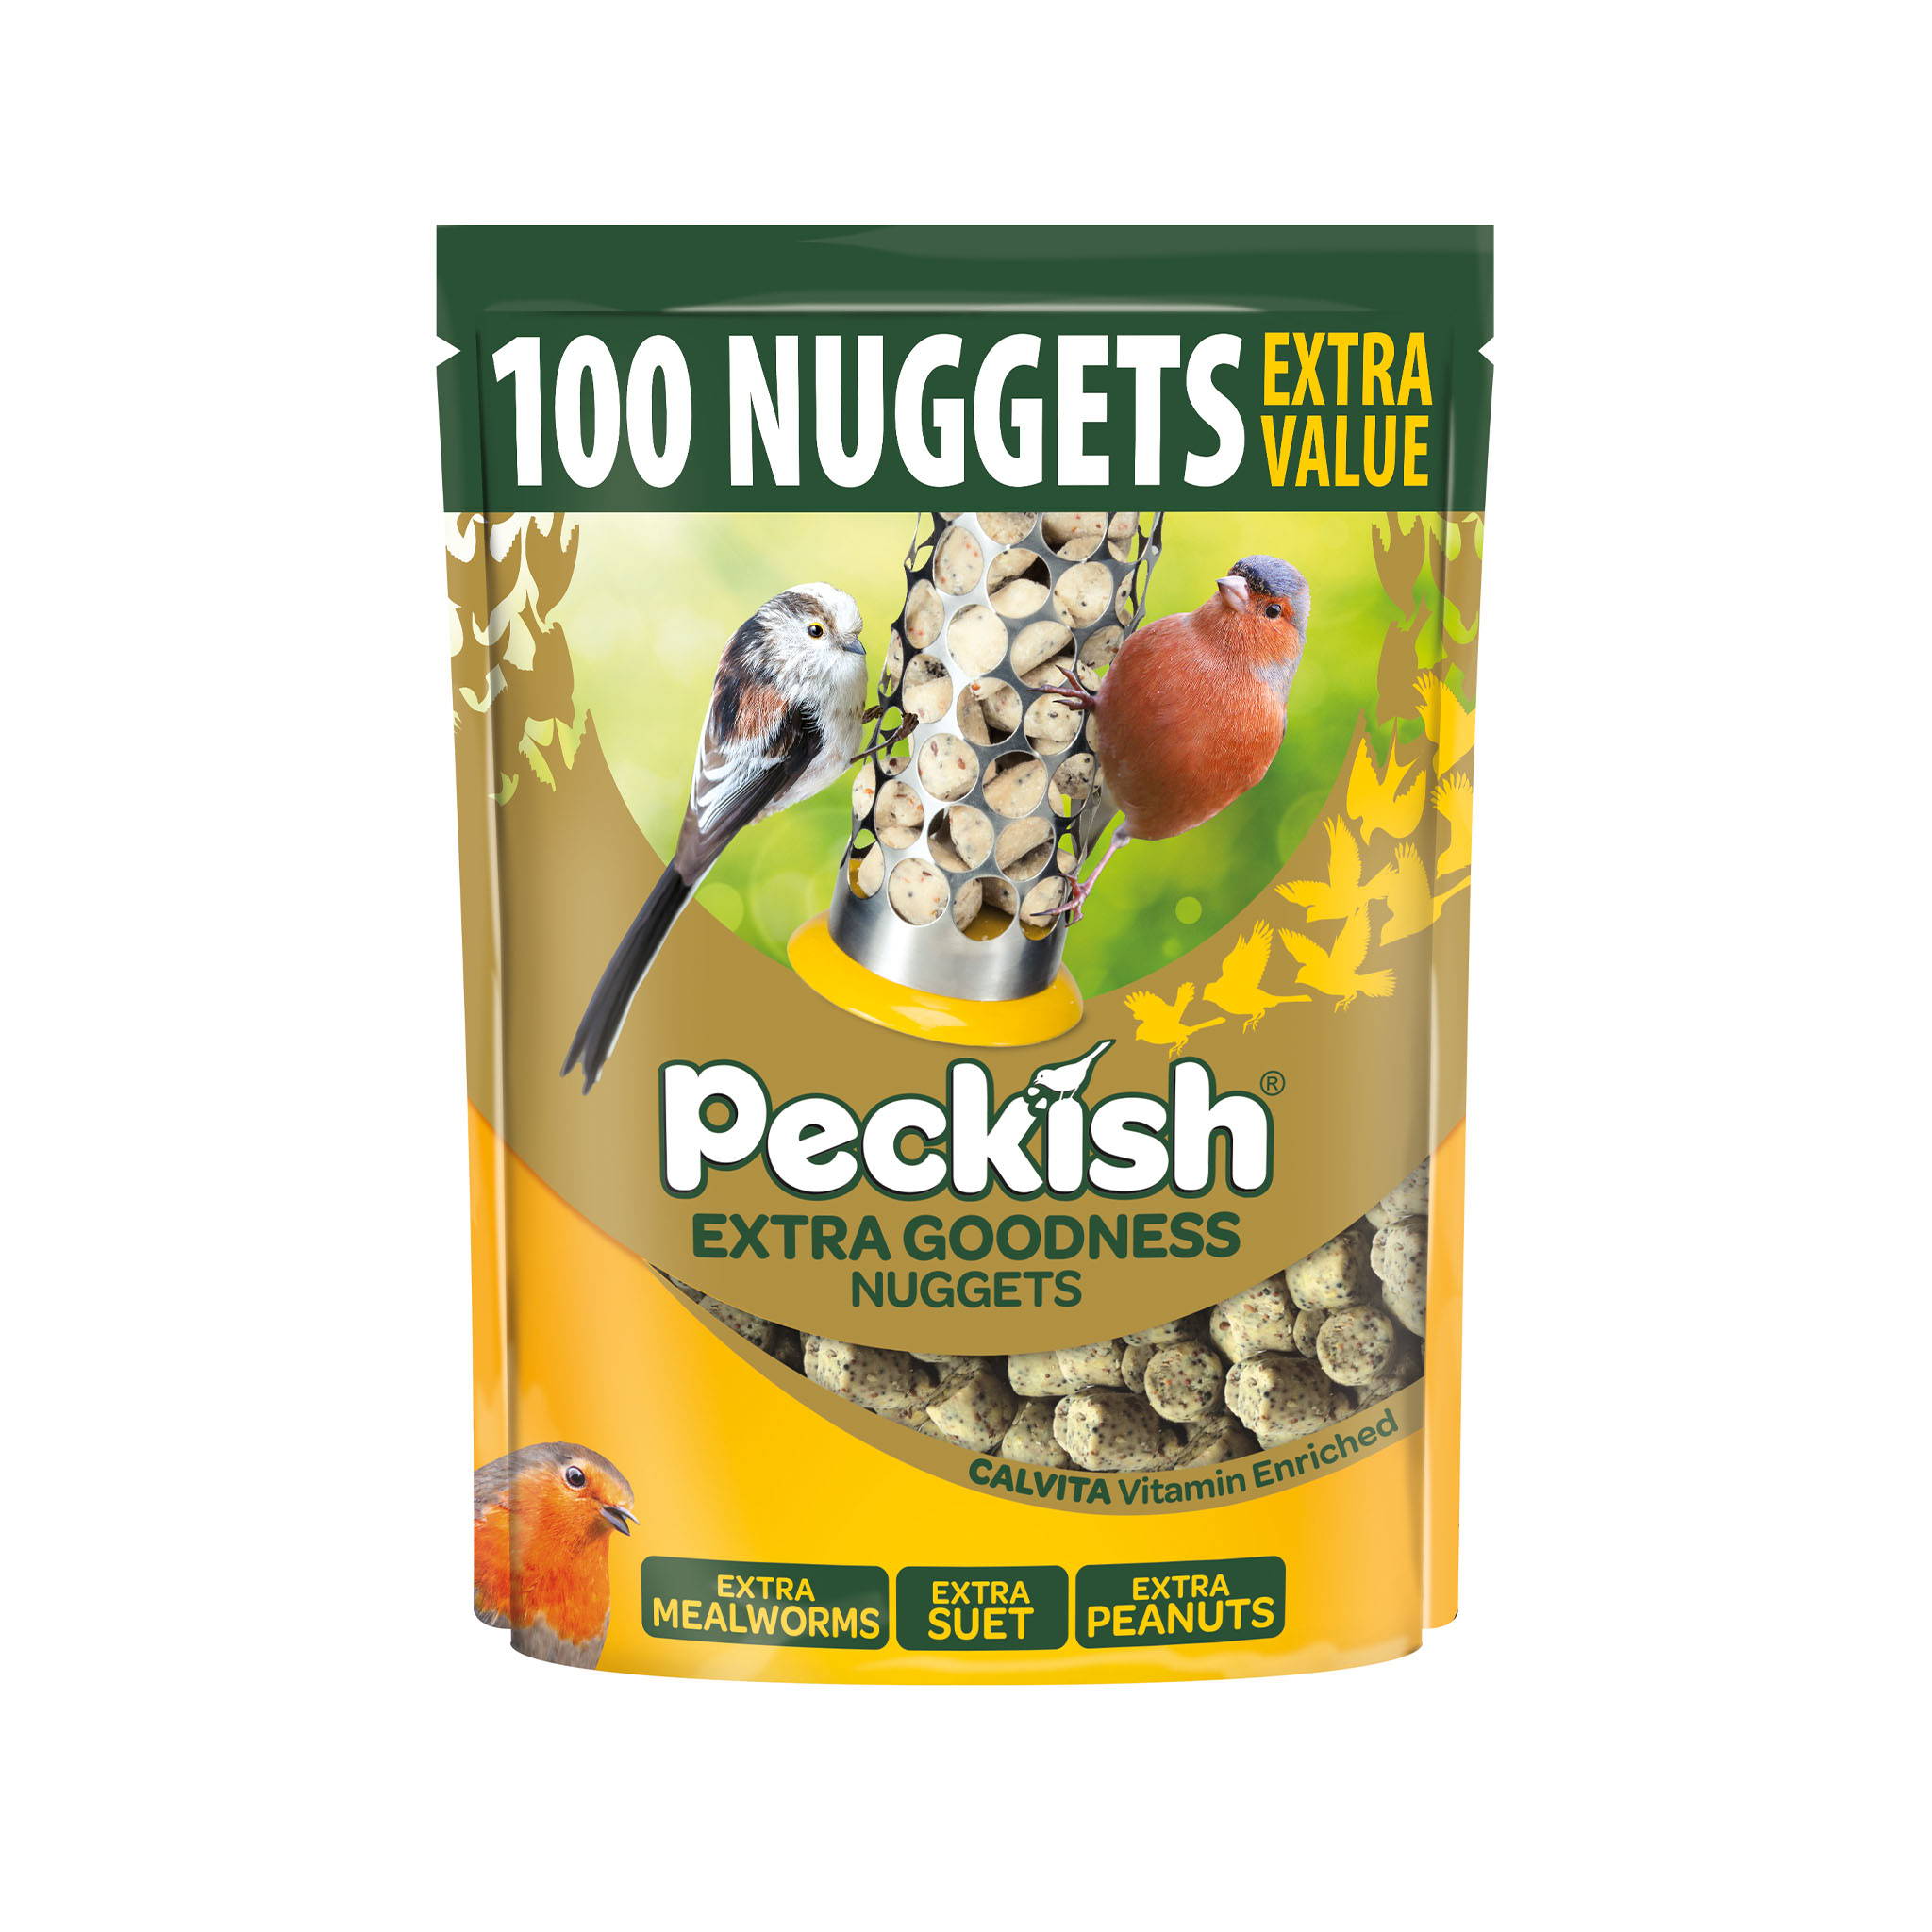 Peckish Extra Goodness Nuggets in packaging